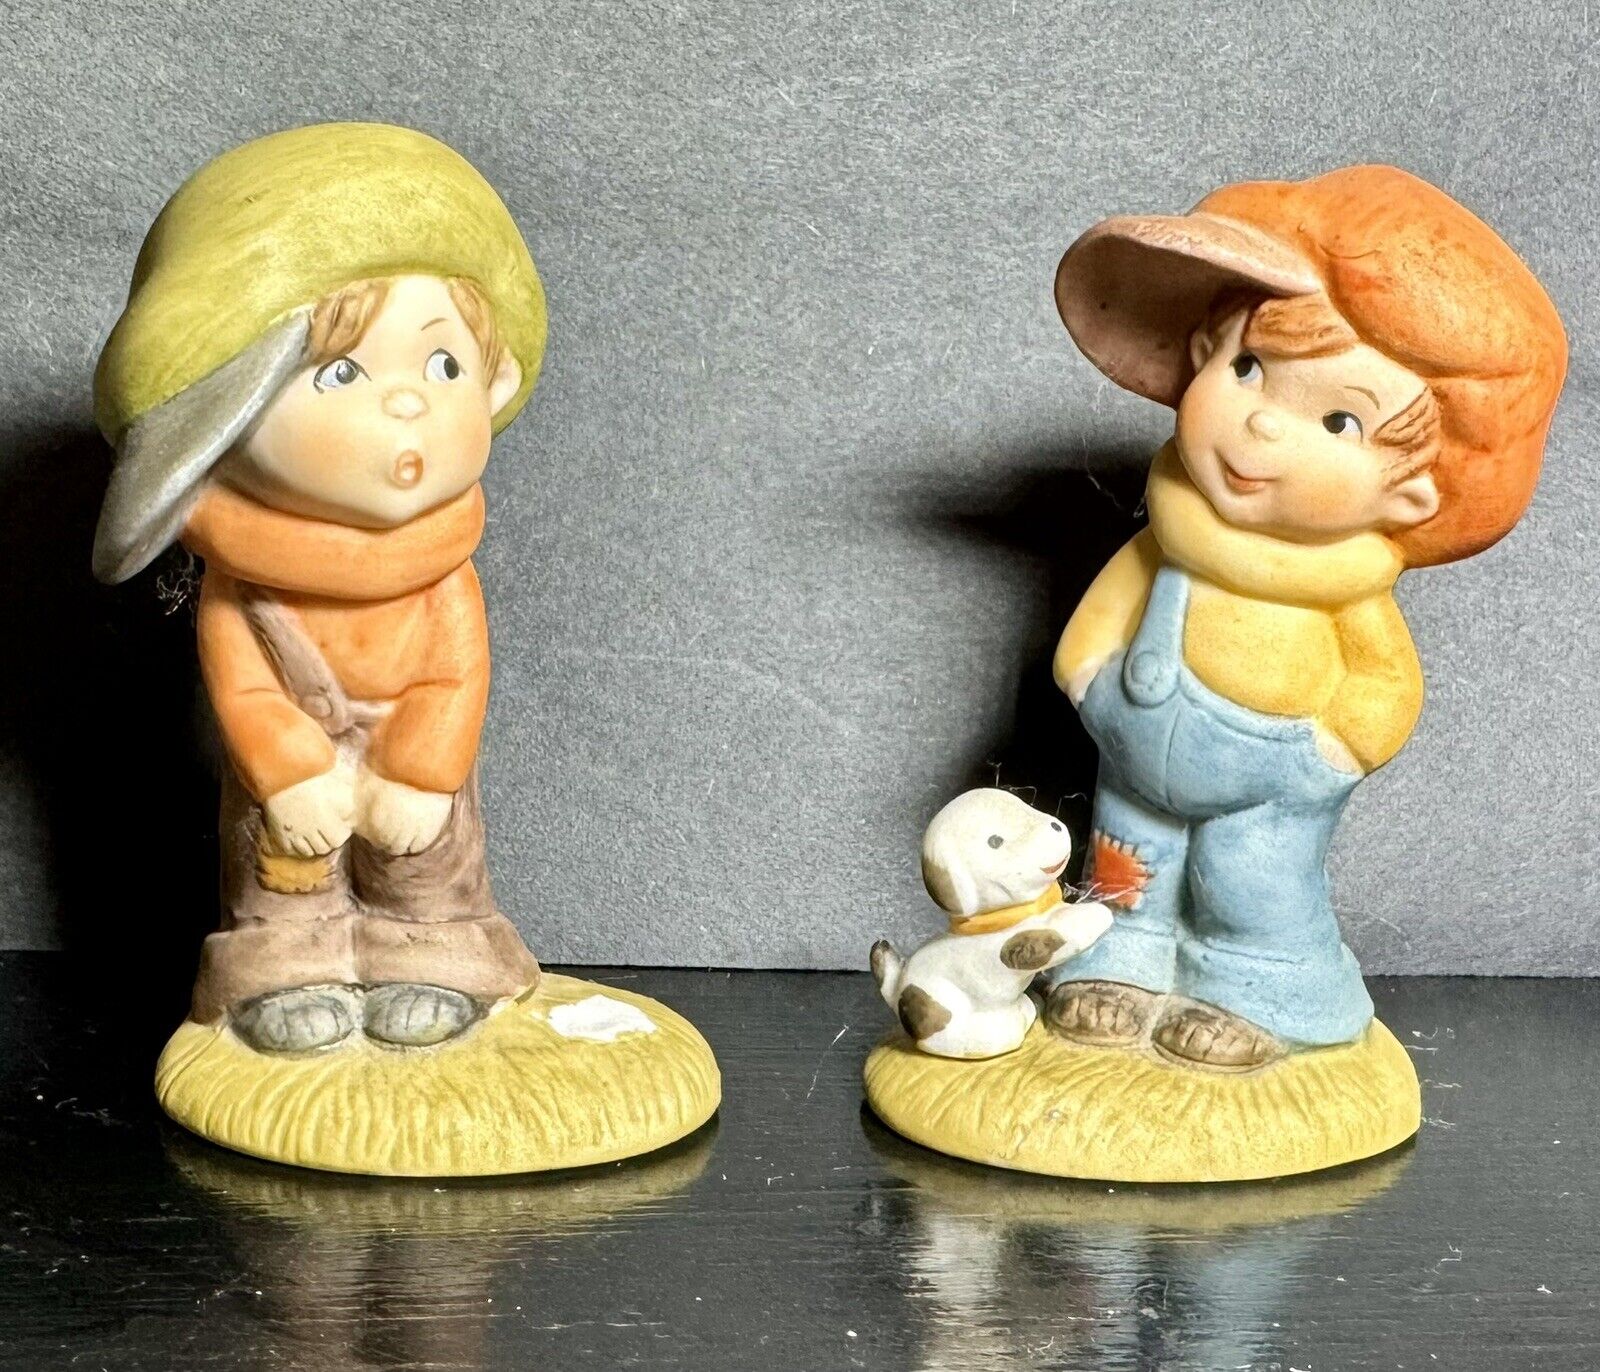 VTG Lefton Porcelain Boys Figurines One With Puppy One Missing Puppy Lot Of 2